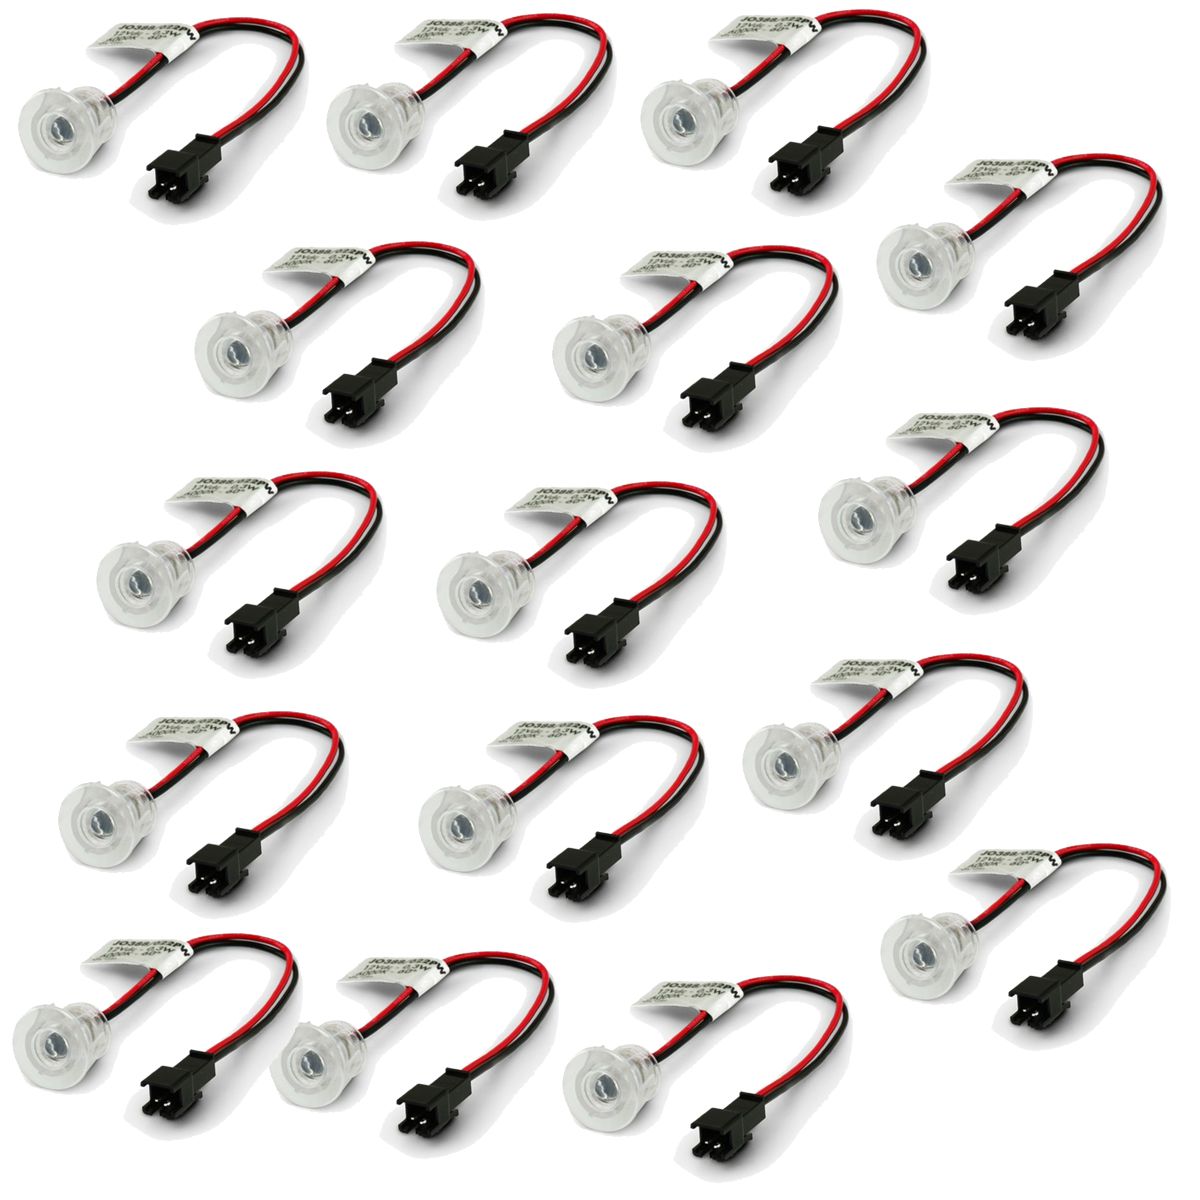 Starry Sky Led Kit 50pcs for Plasterboard Ceiling + Power Supply (Tran